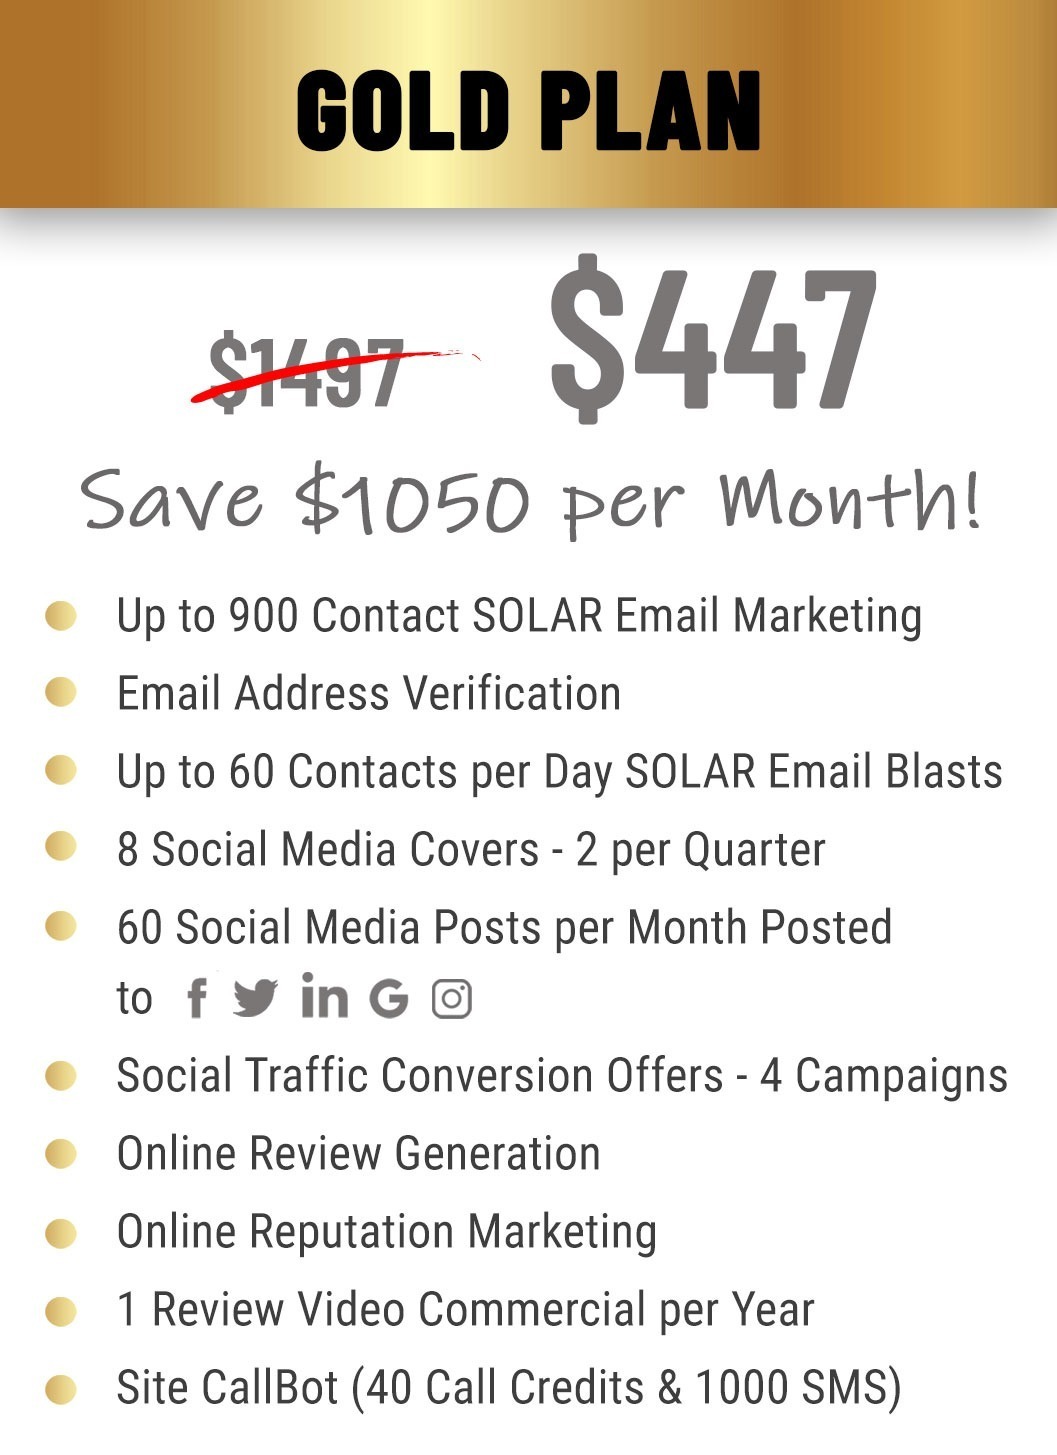 Gold Plan Pricing and Features SOLAR